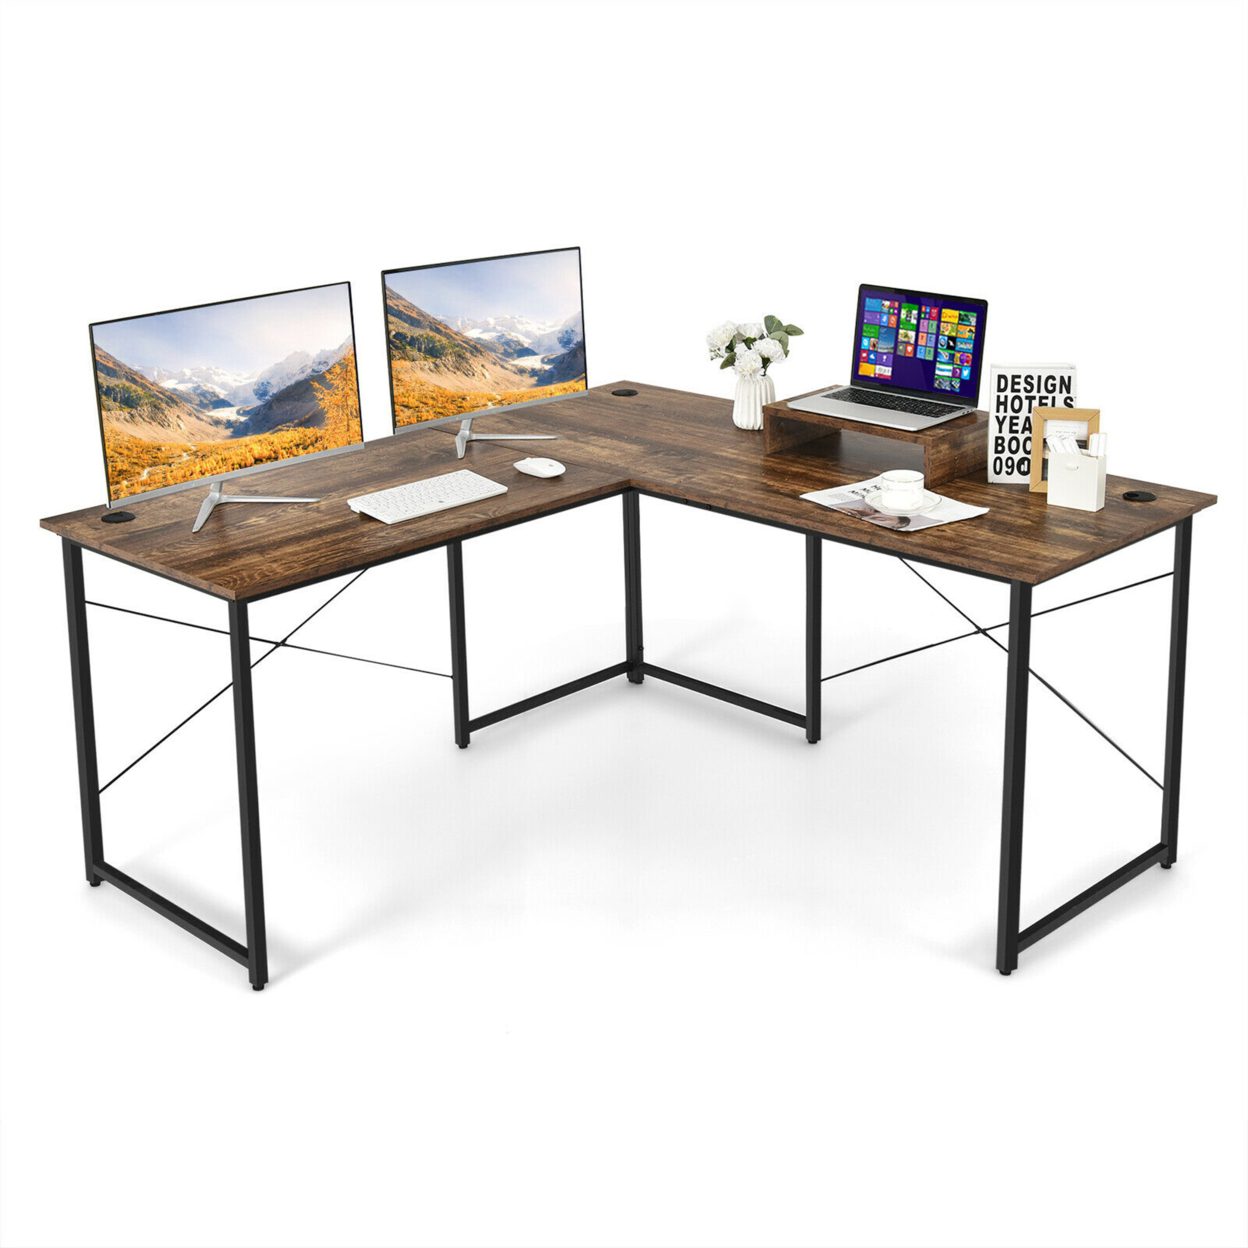 L-Shaped Reversible Computer Desk 2-Person Long Table W/Monitor Stand - Rustic Brown